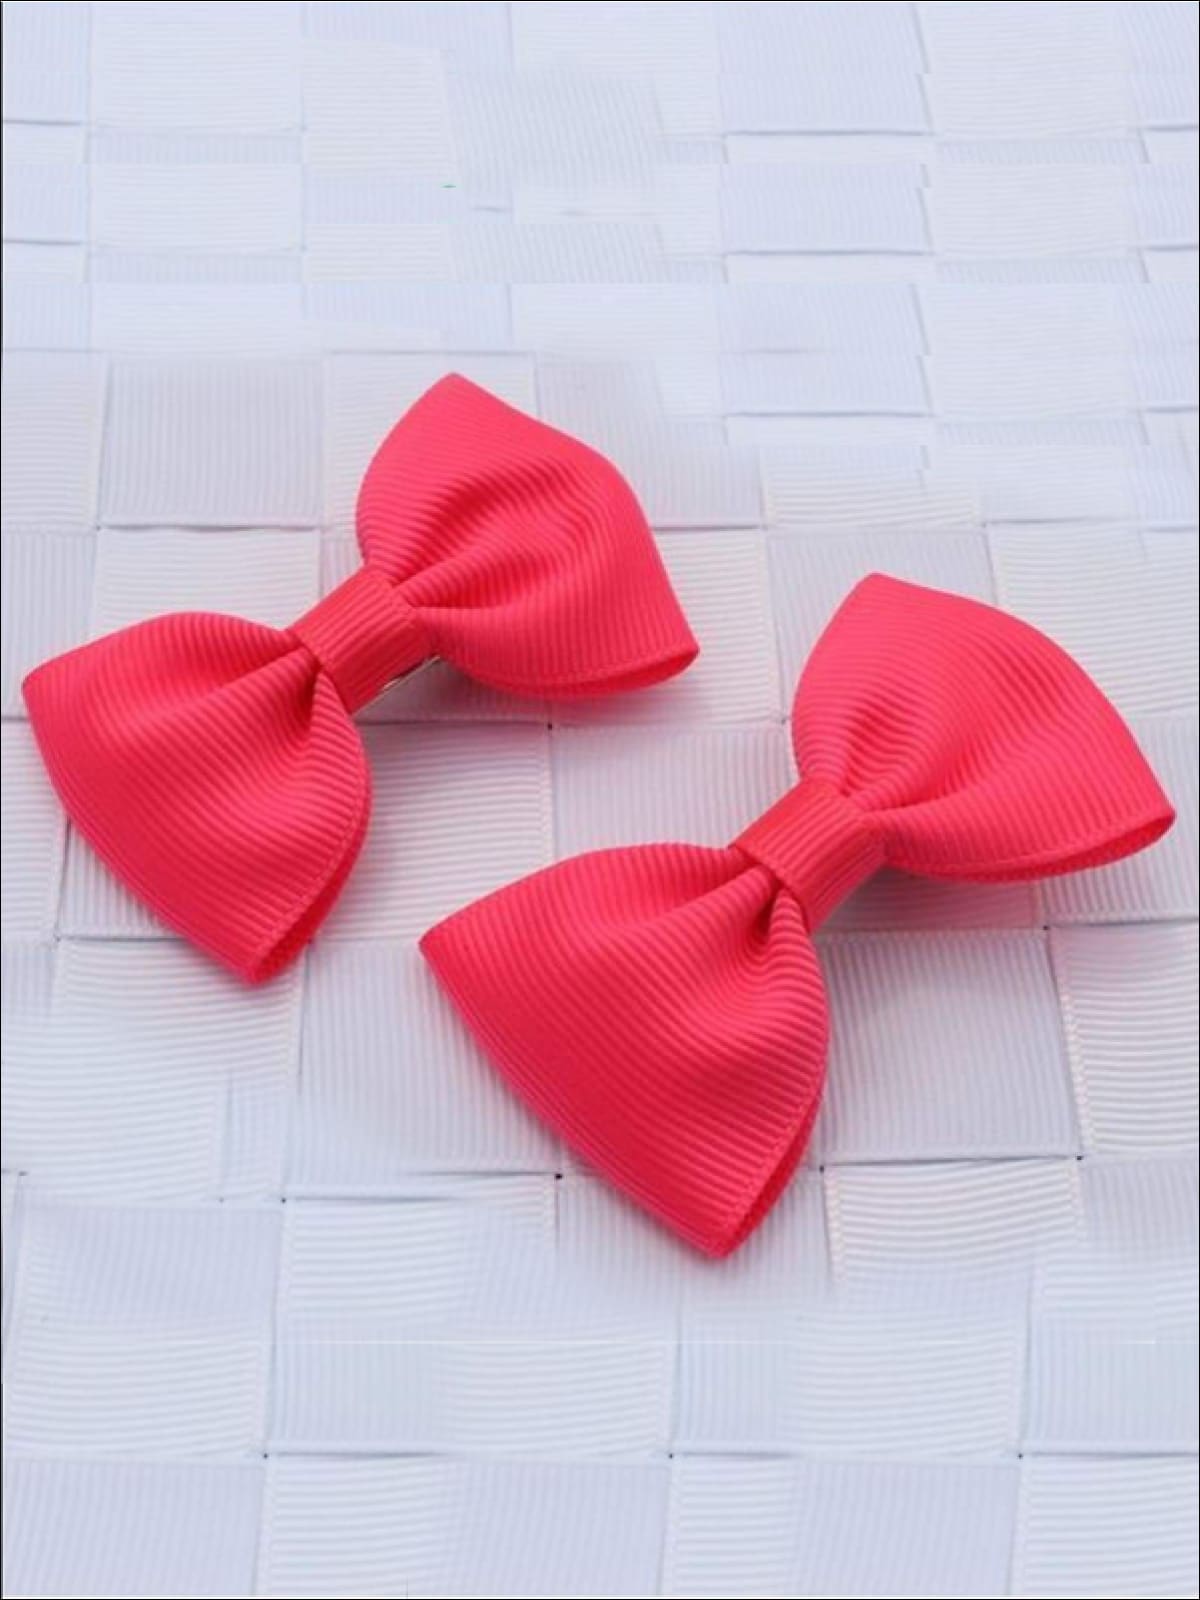 Girls Mini Bow Tie Hair Clips ( Multiple Color Options) - passion fruit - Hair Accessories